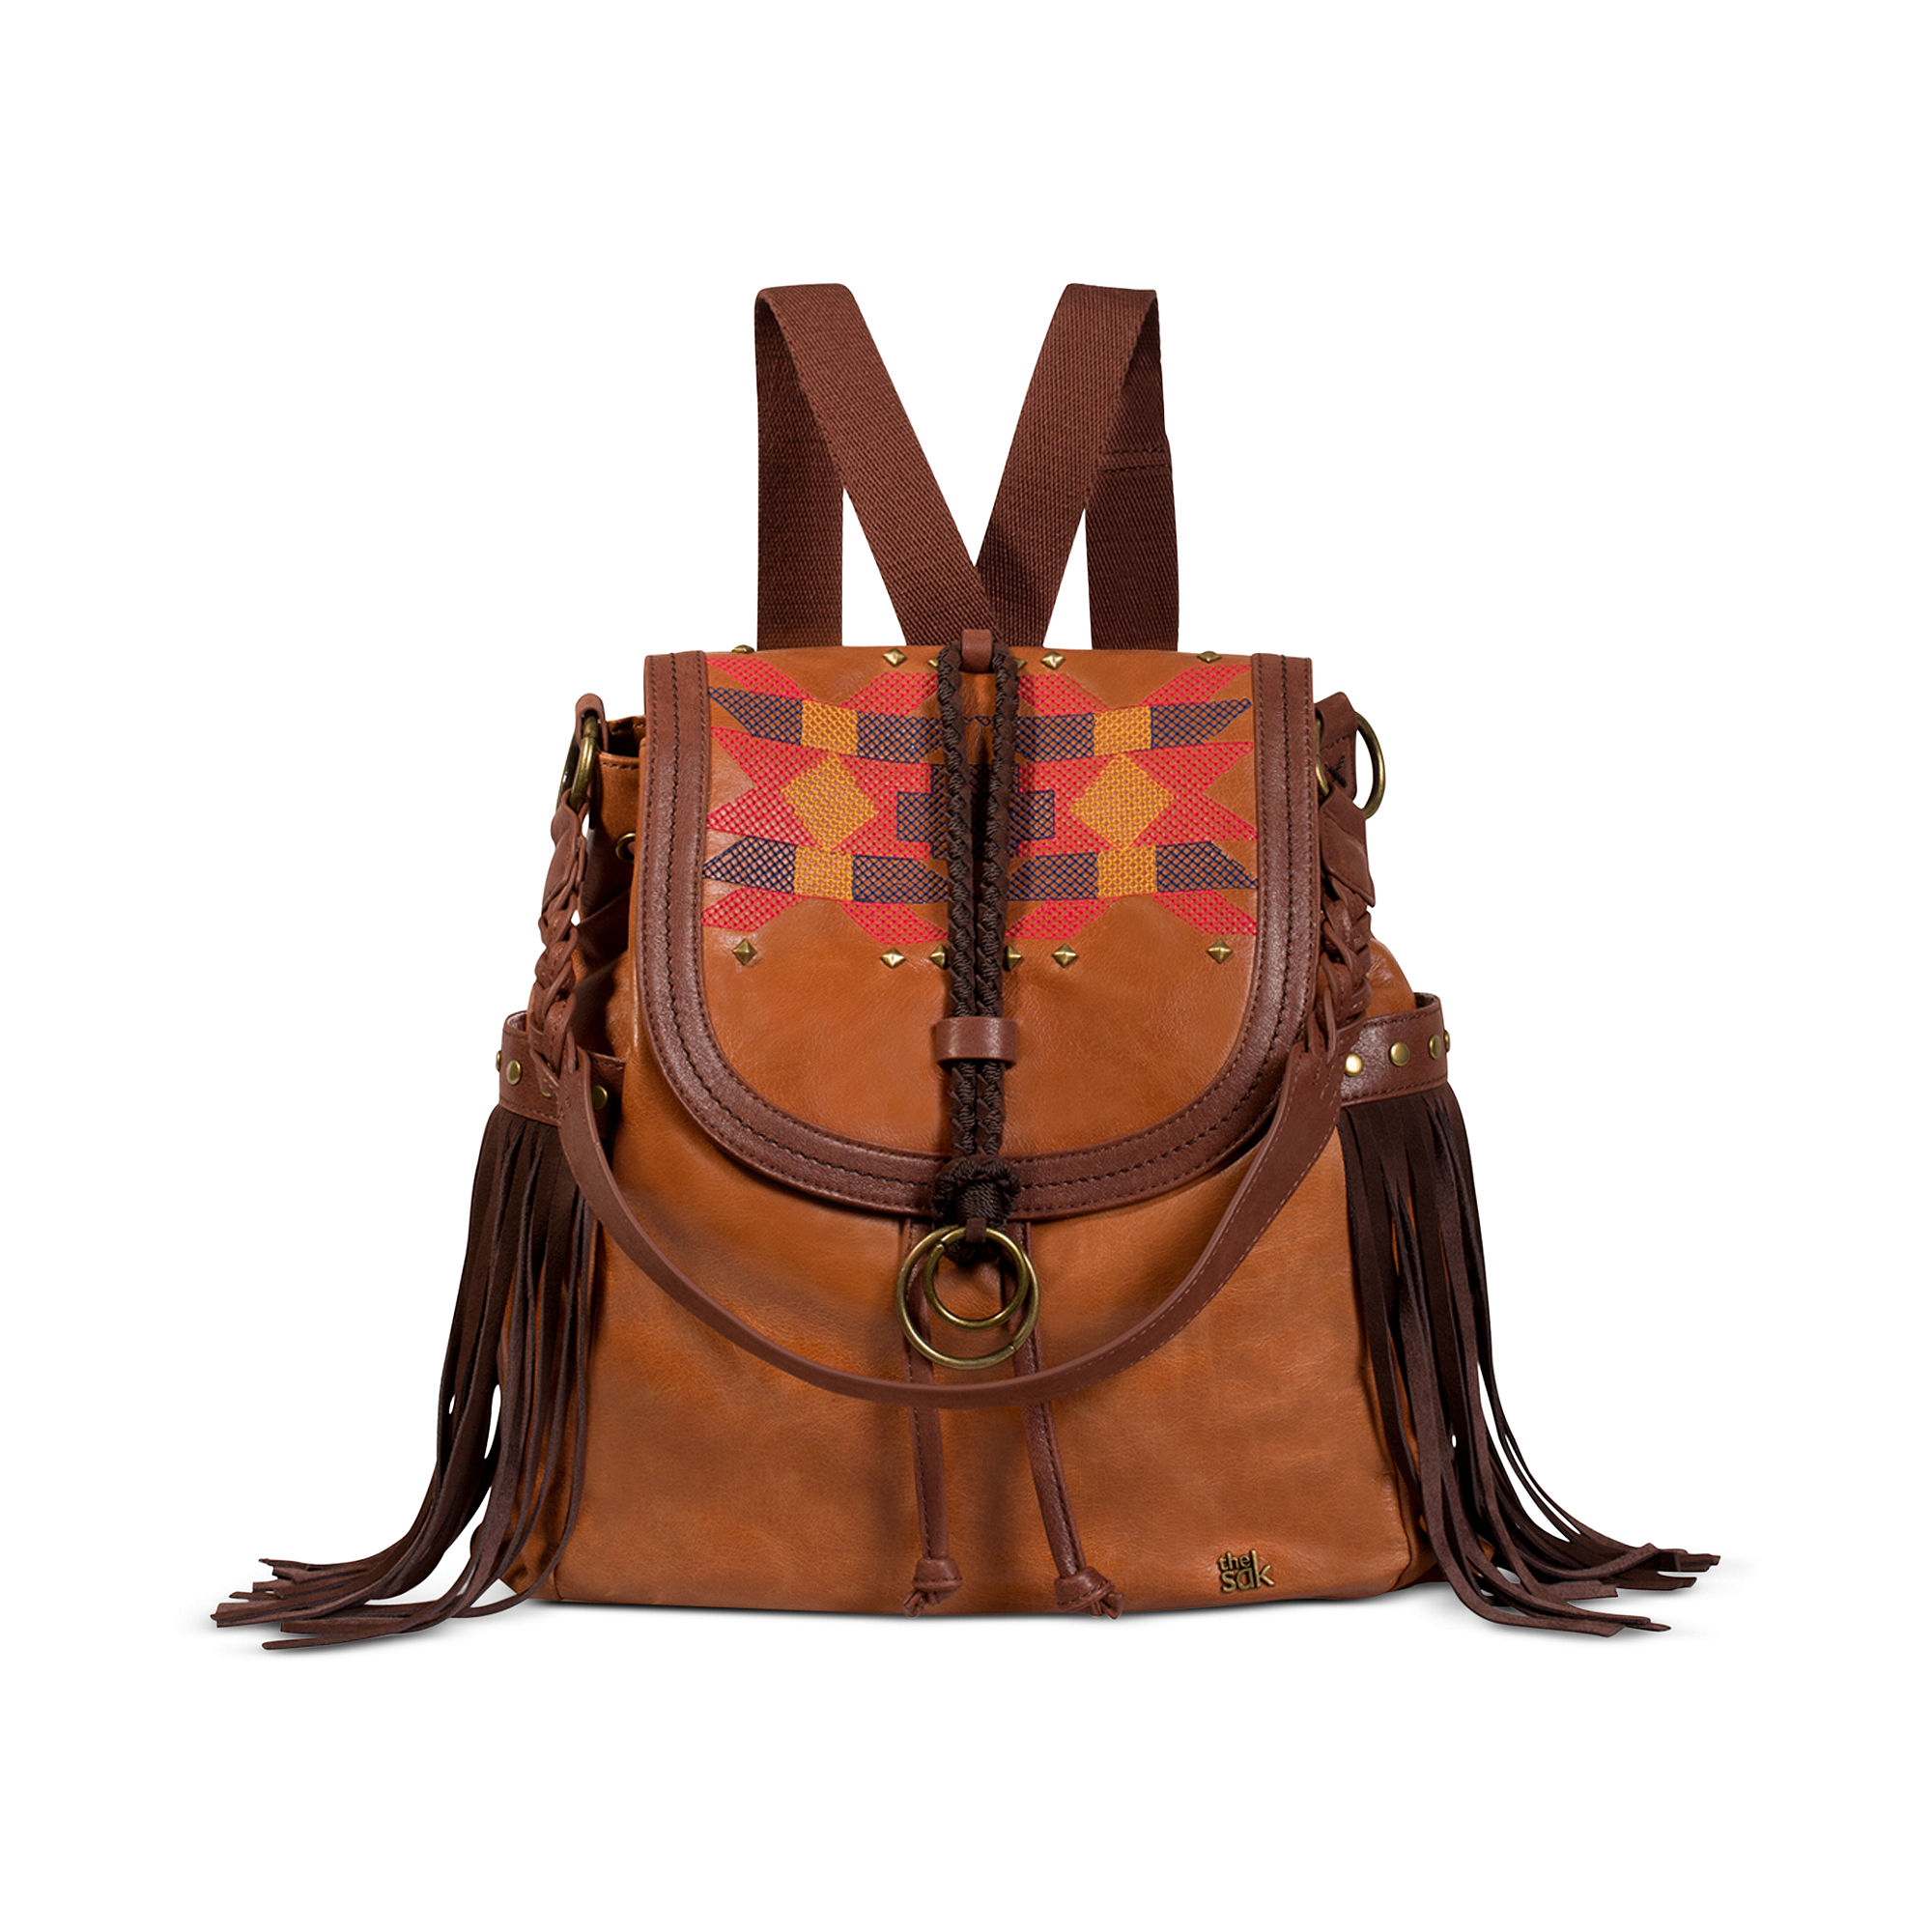 The Sak Convertible Shoulder Purse Hand Brown Leather Backpack | IUCN Water